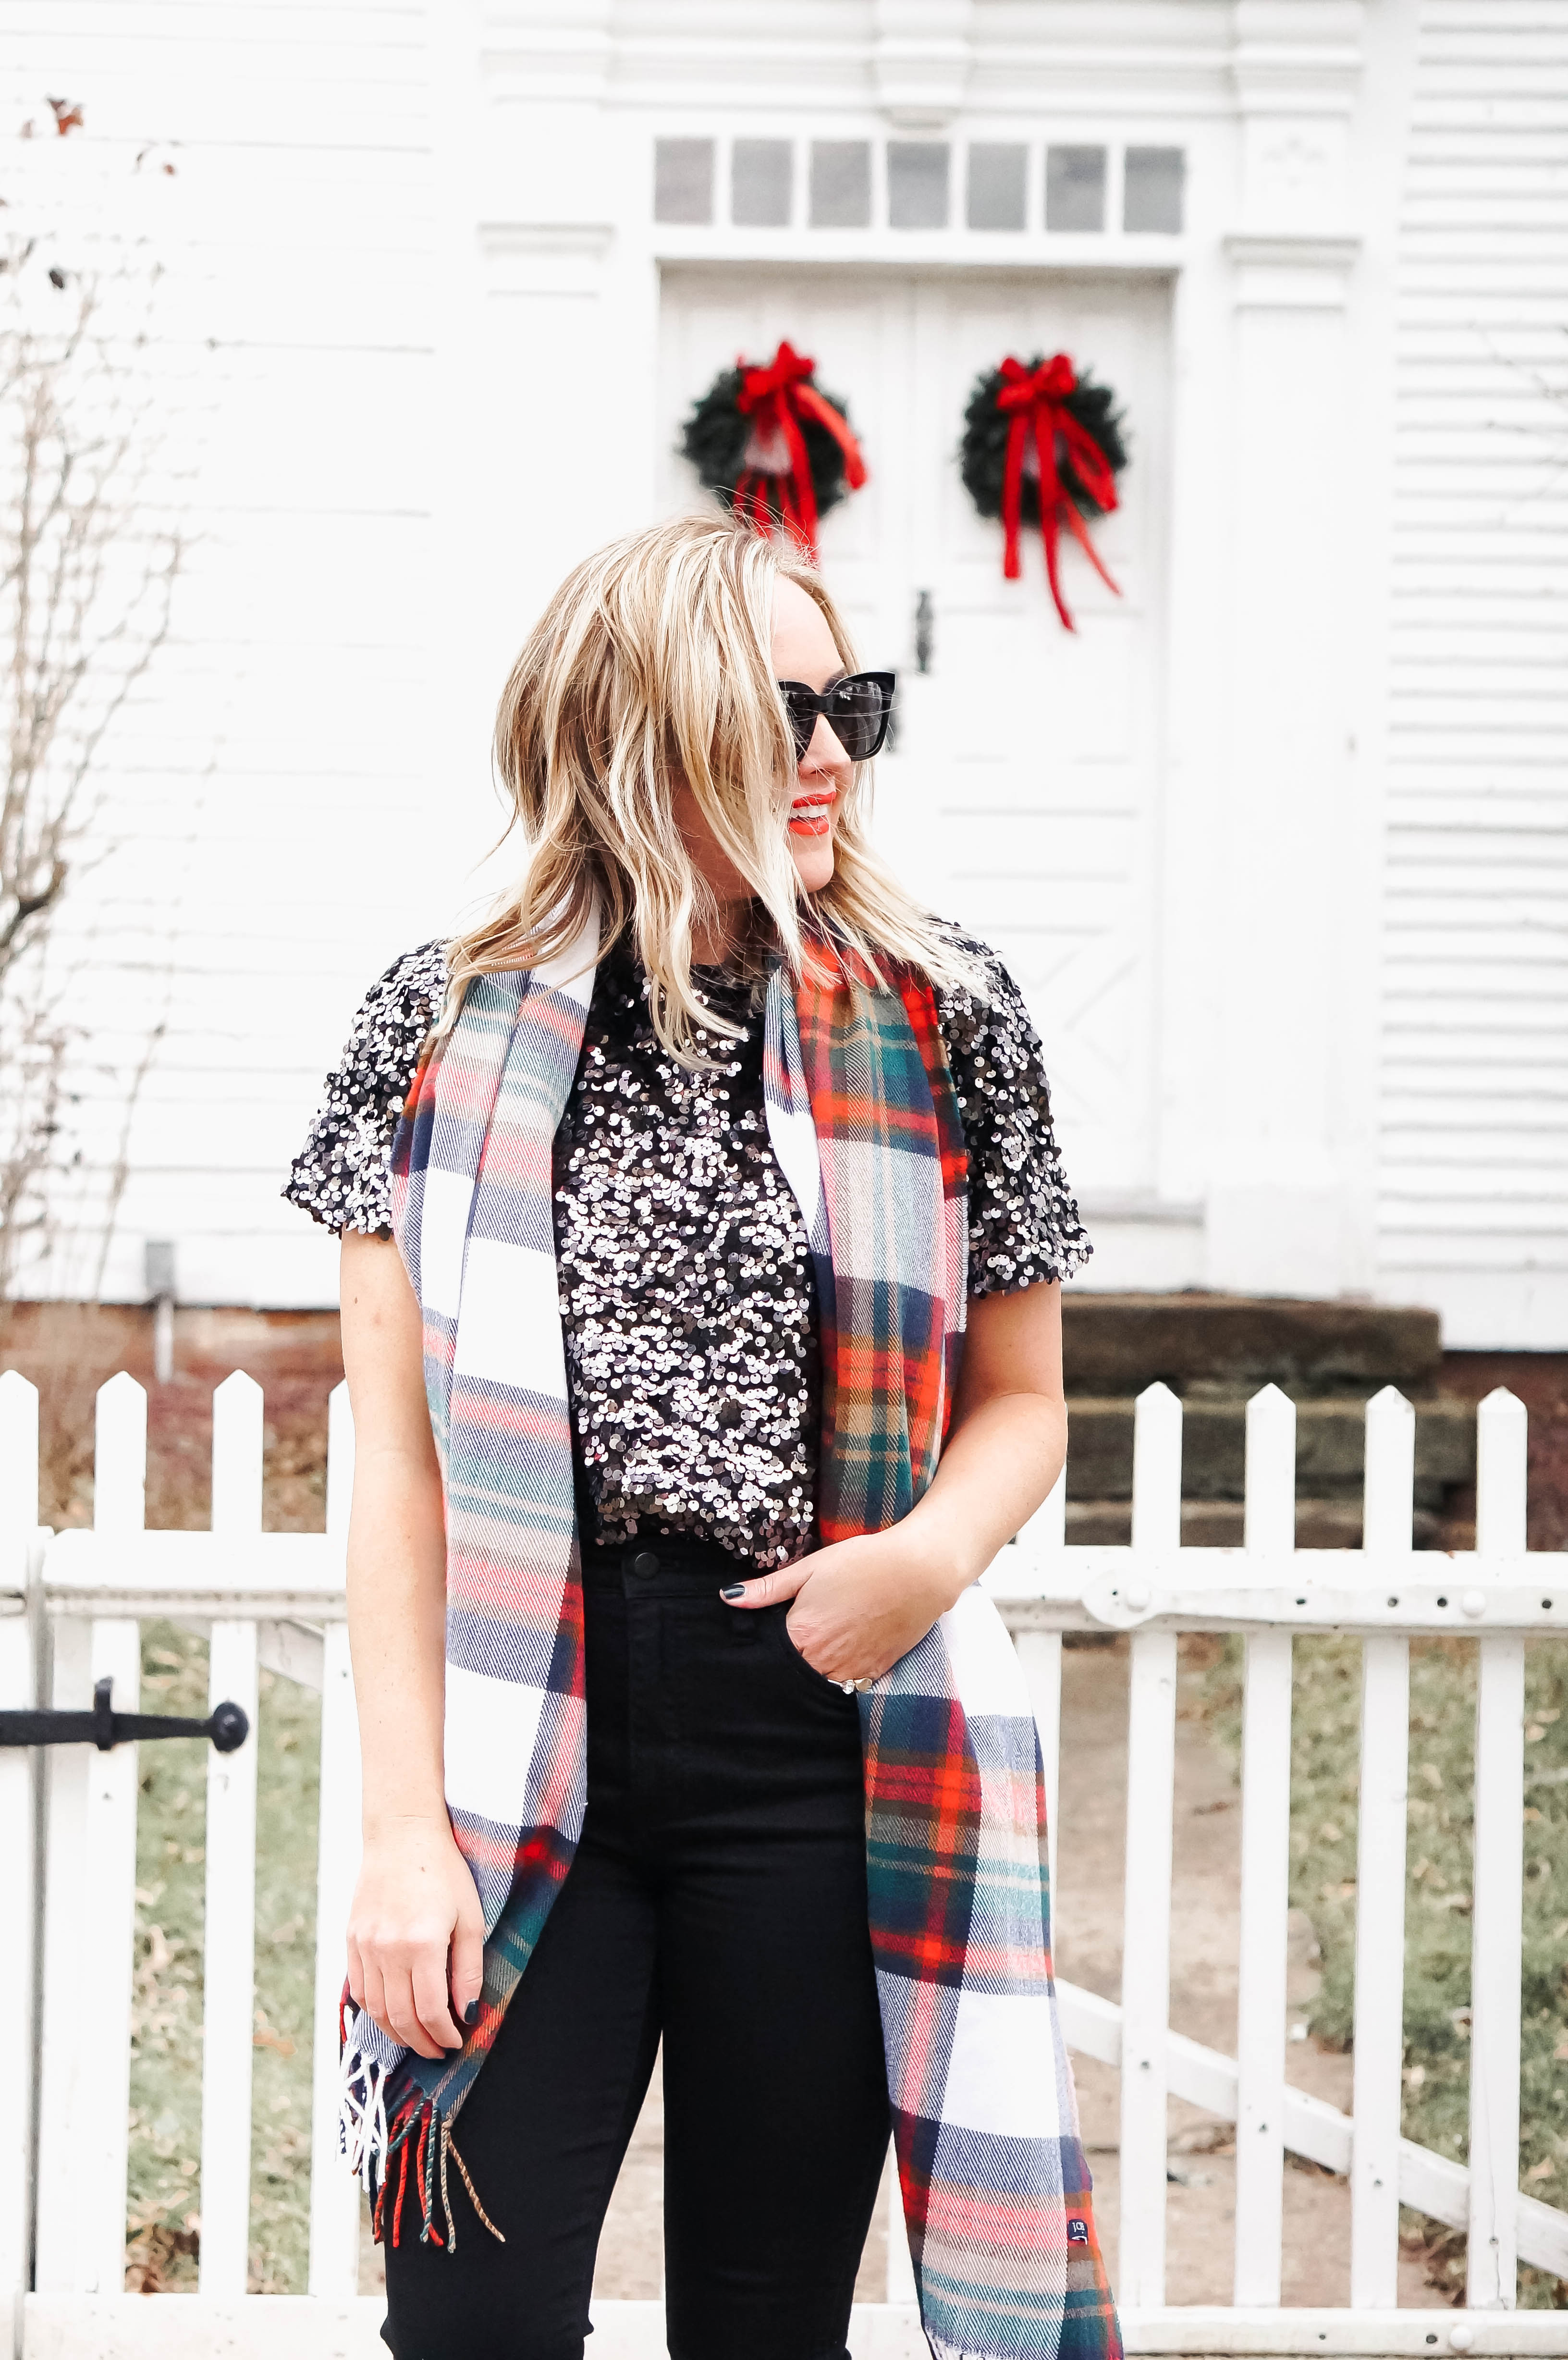 How To Wear Sequins This Holiday Season